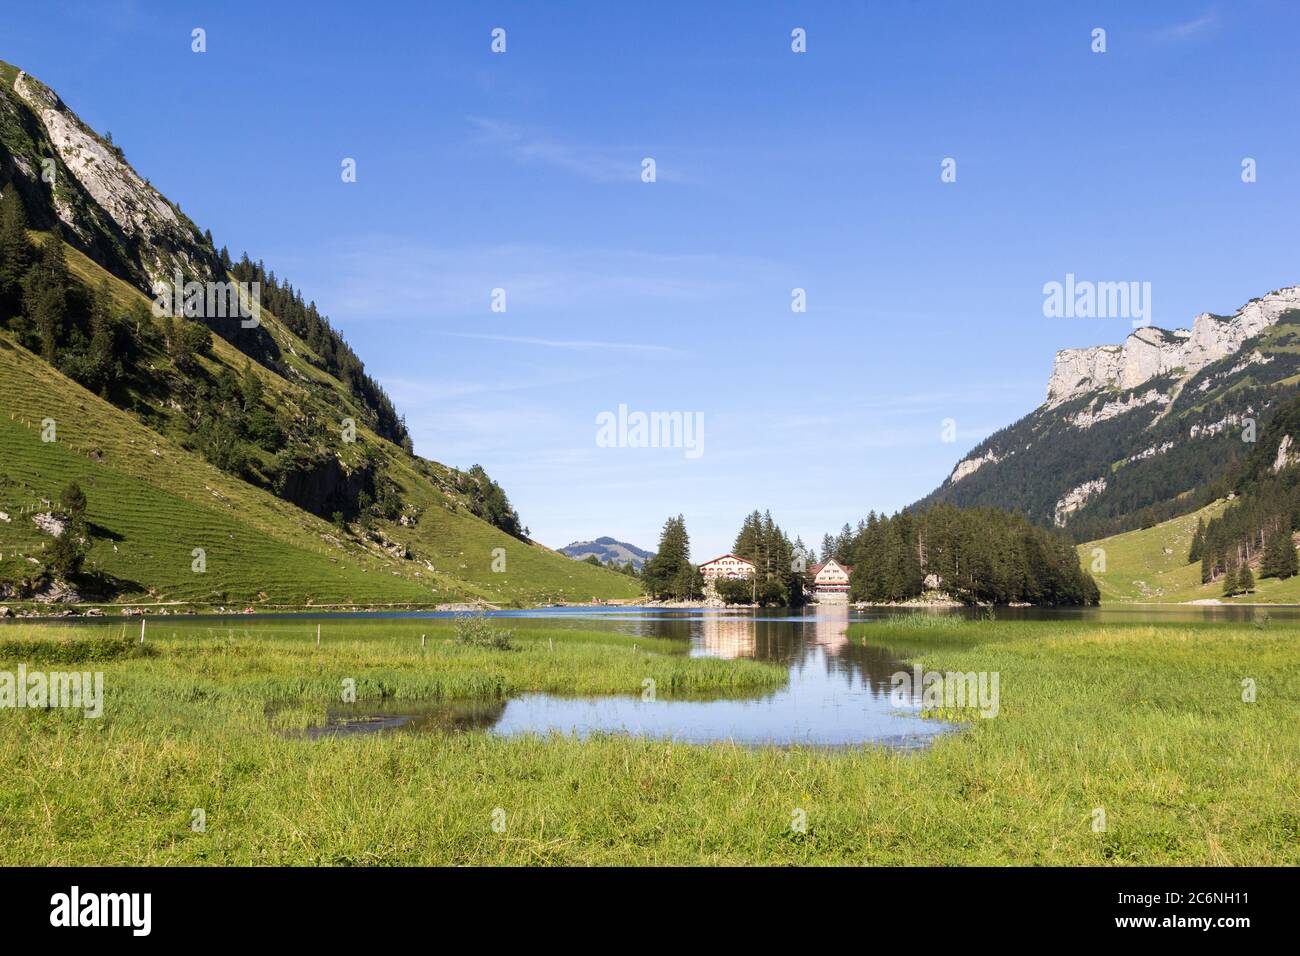 Lake Seealpsee with wetland at the foreground and house reflection in the valley of Ebenalp, Appenzellerland, Switzerland Stock Photo